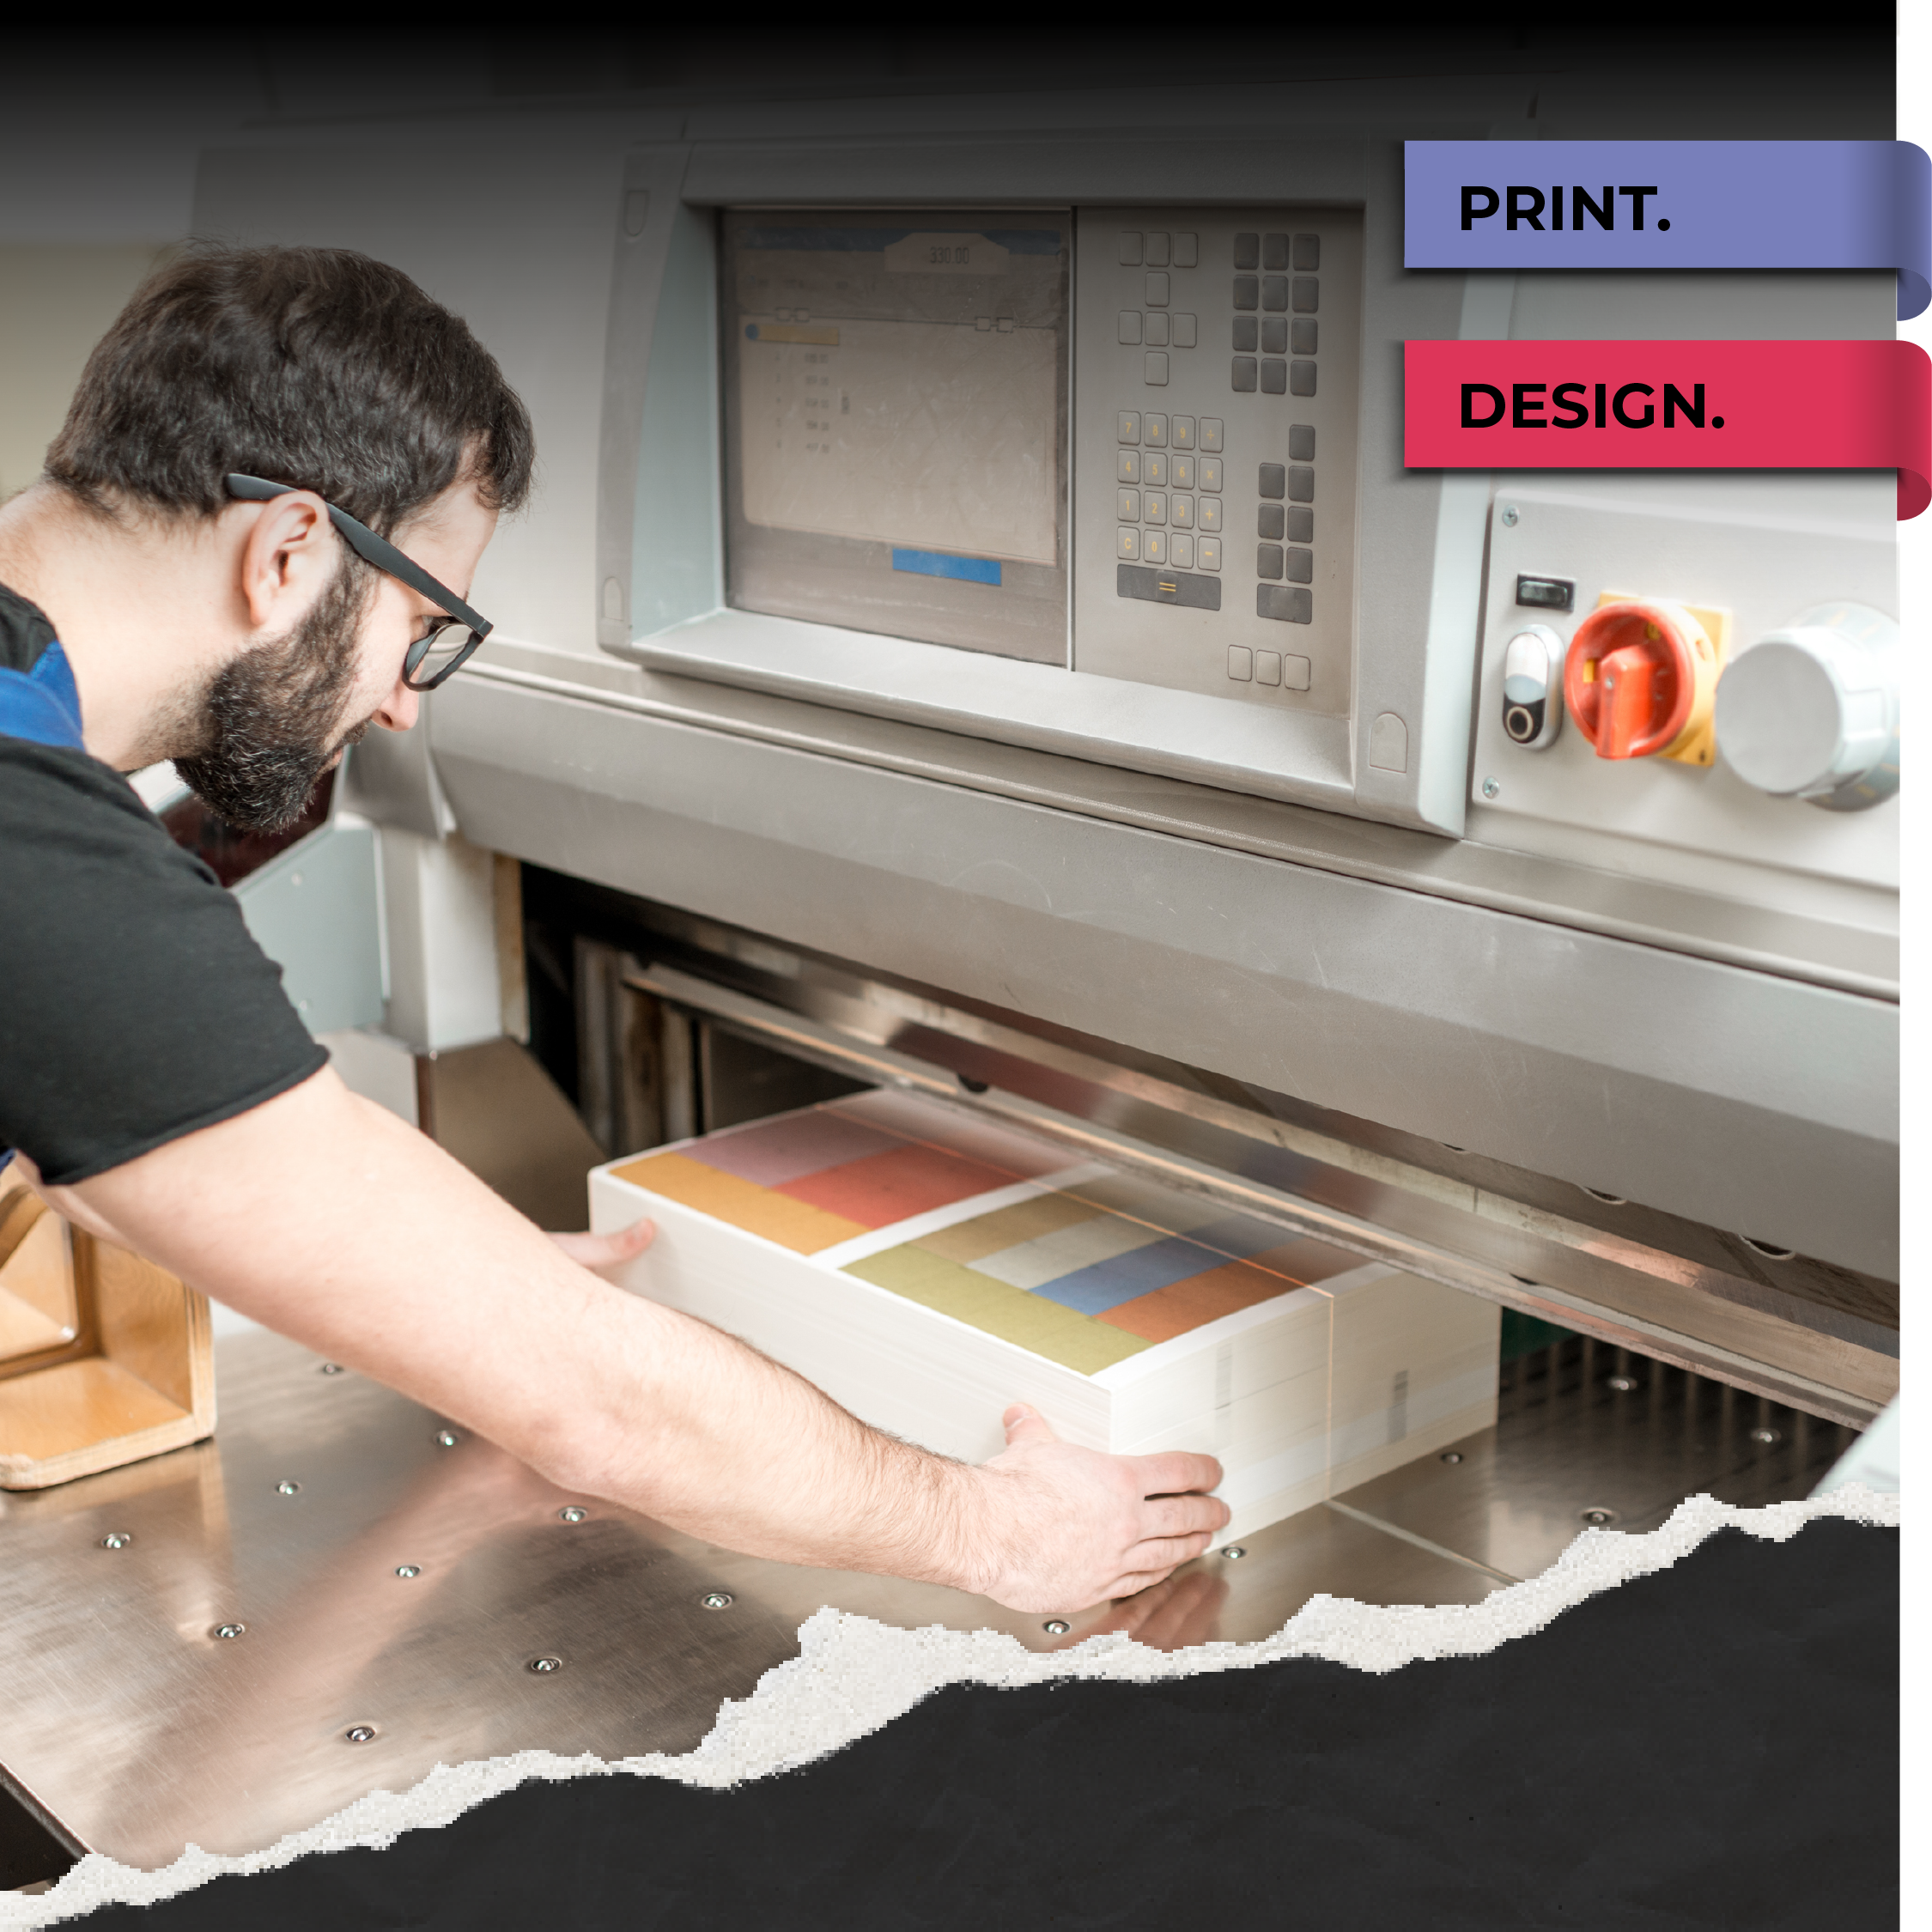 6 tips for perfect print.